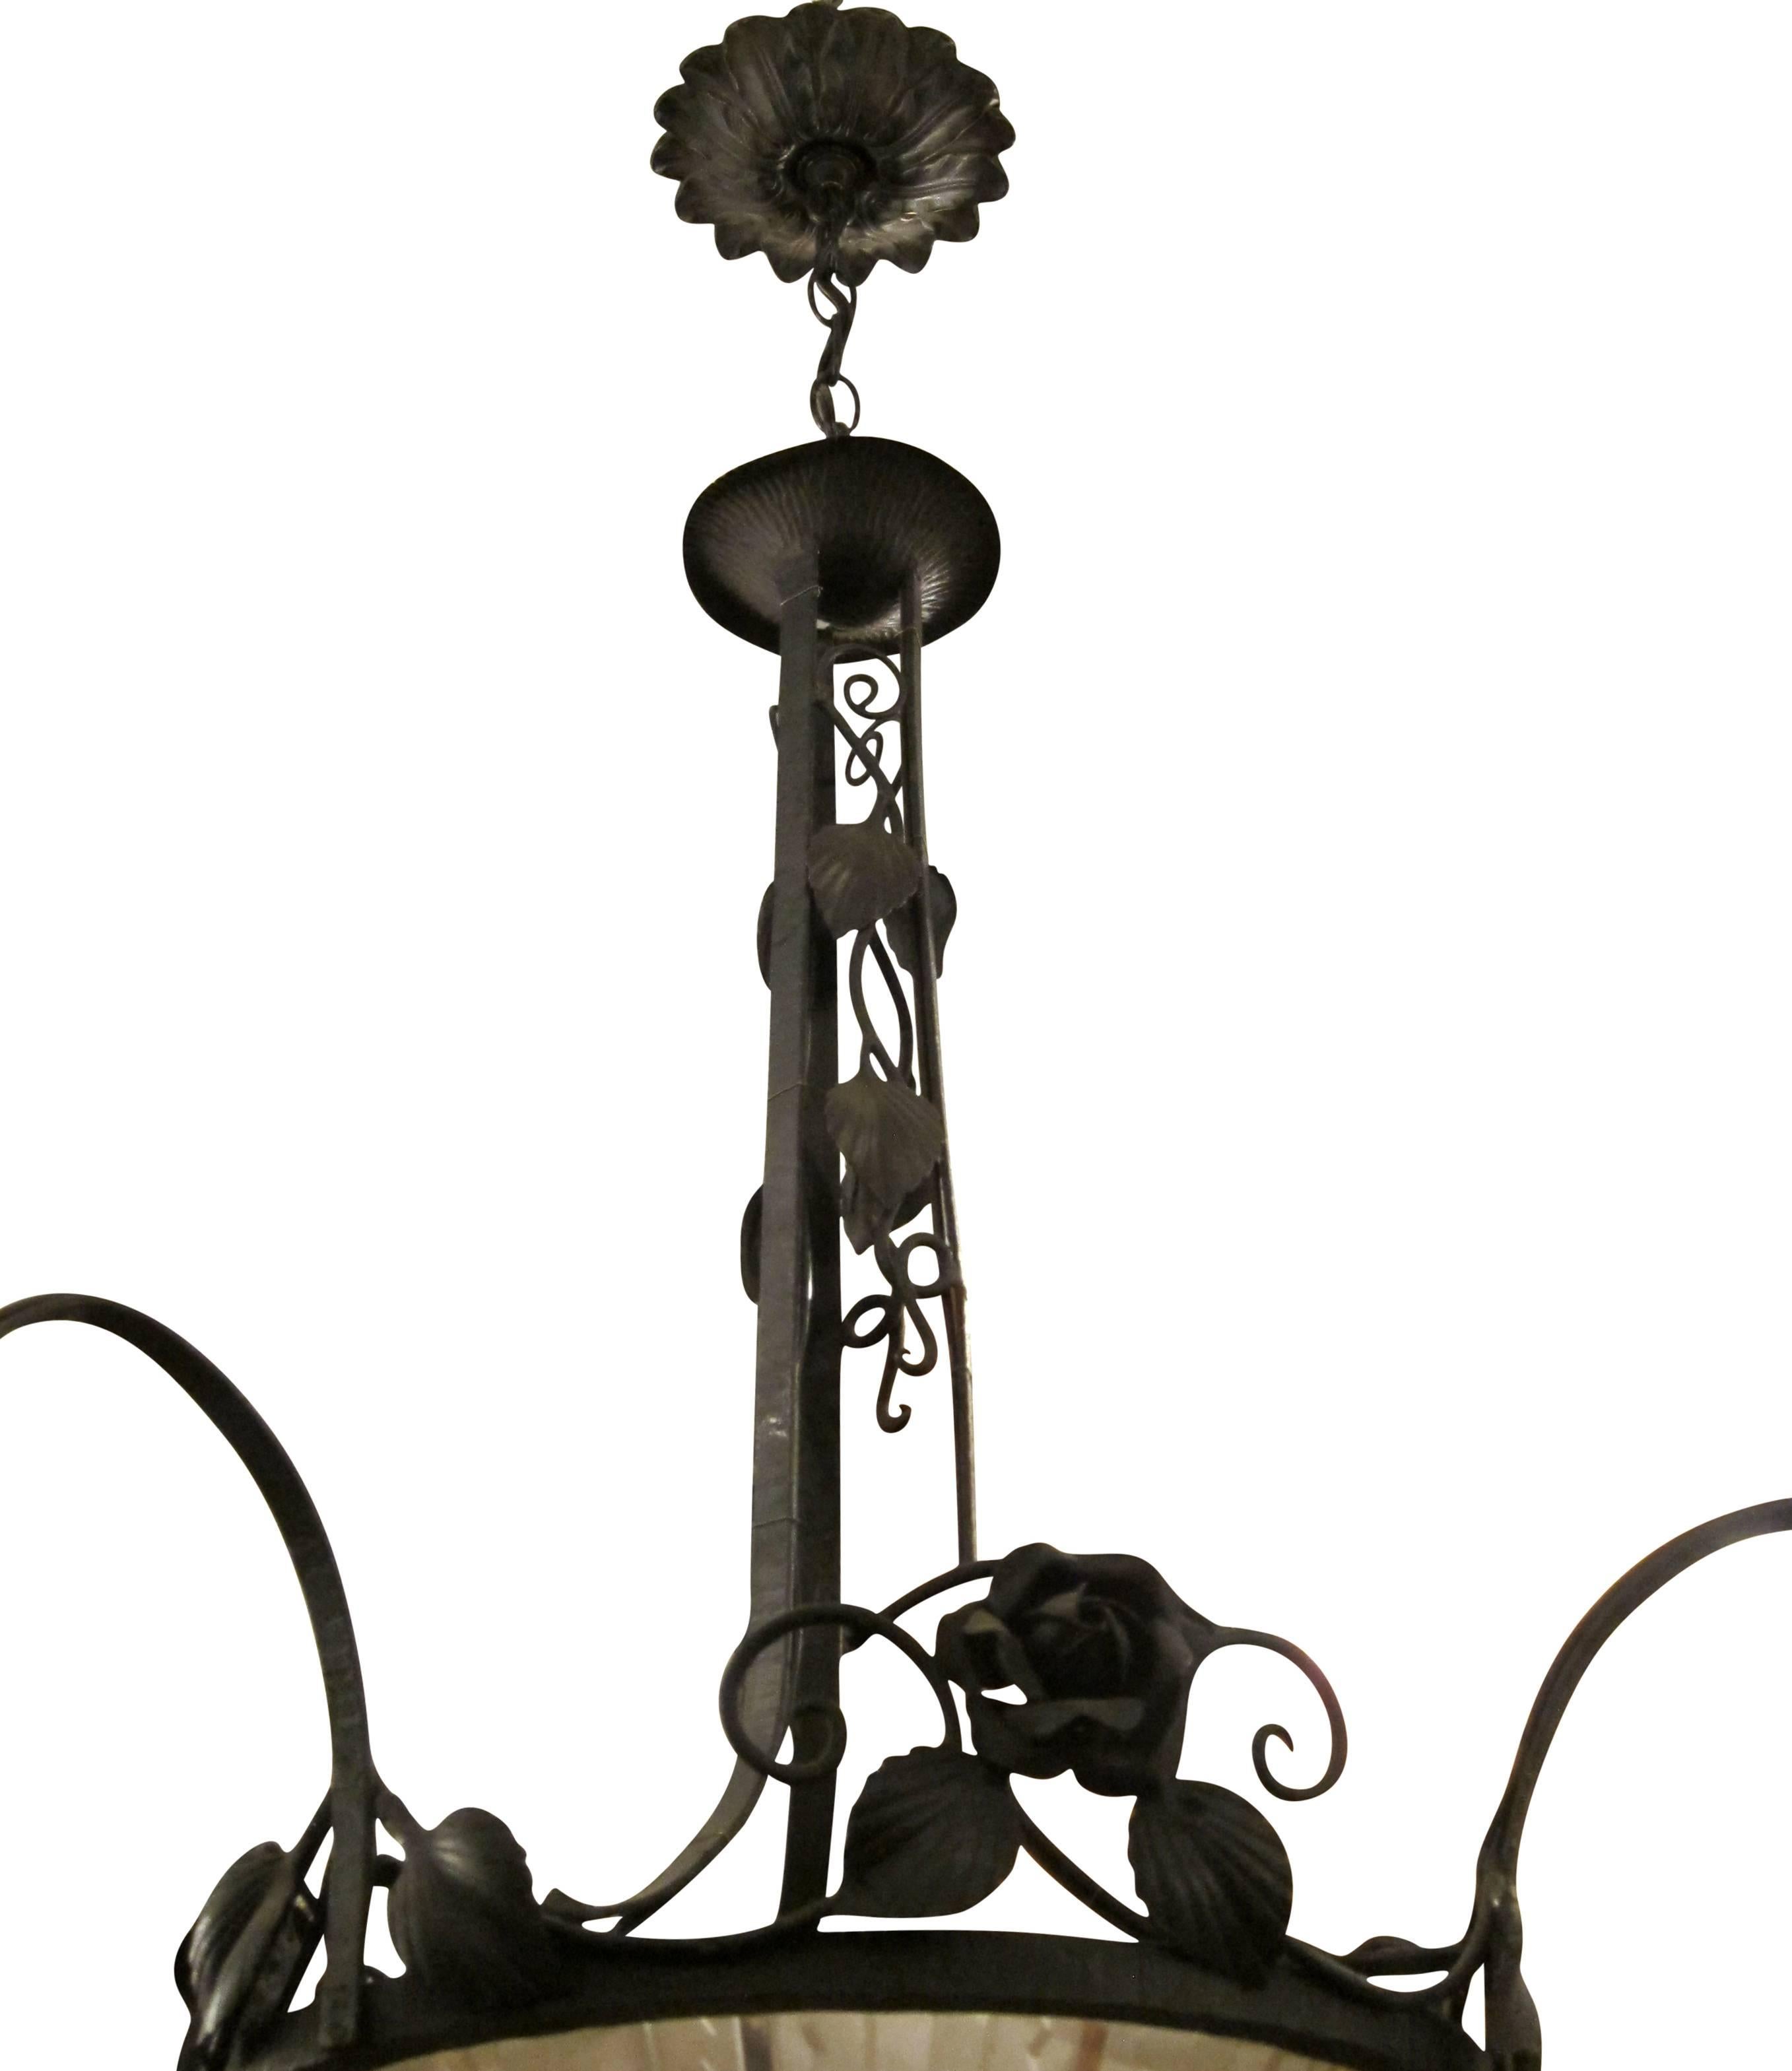 Ornate hand worked wrought iron chandelier. Features three down lights and a lit up glass bowl. Uses standard E26 lightbulbs. This can be seen at our 400 Gilligan St location in Scranton, PA.